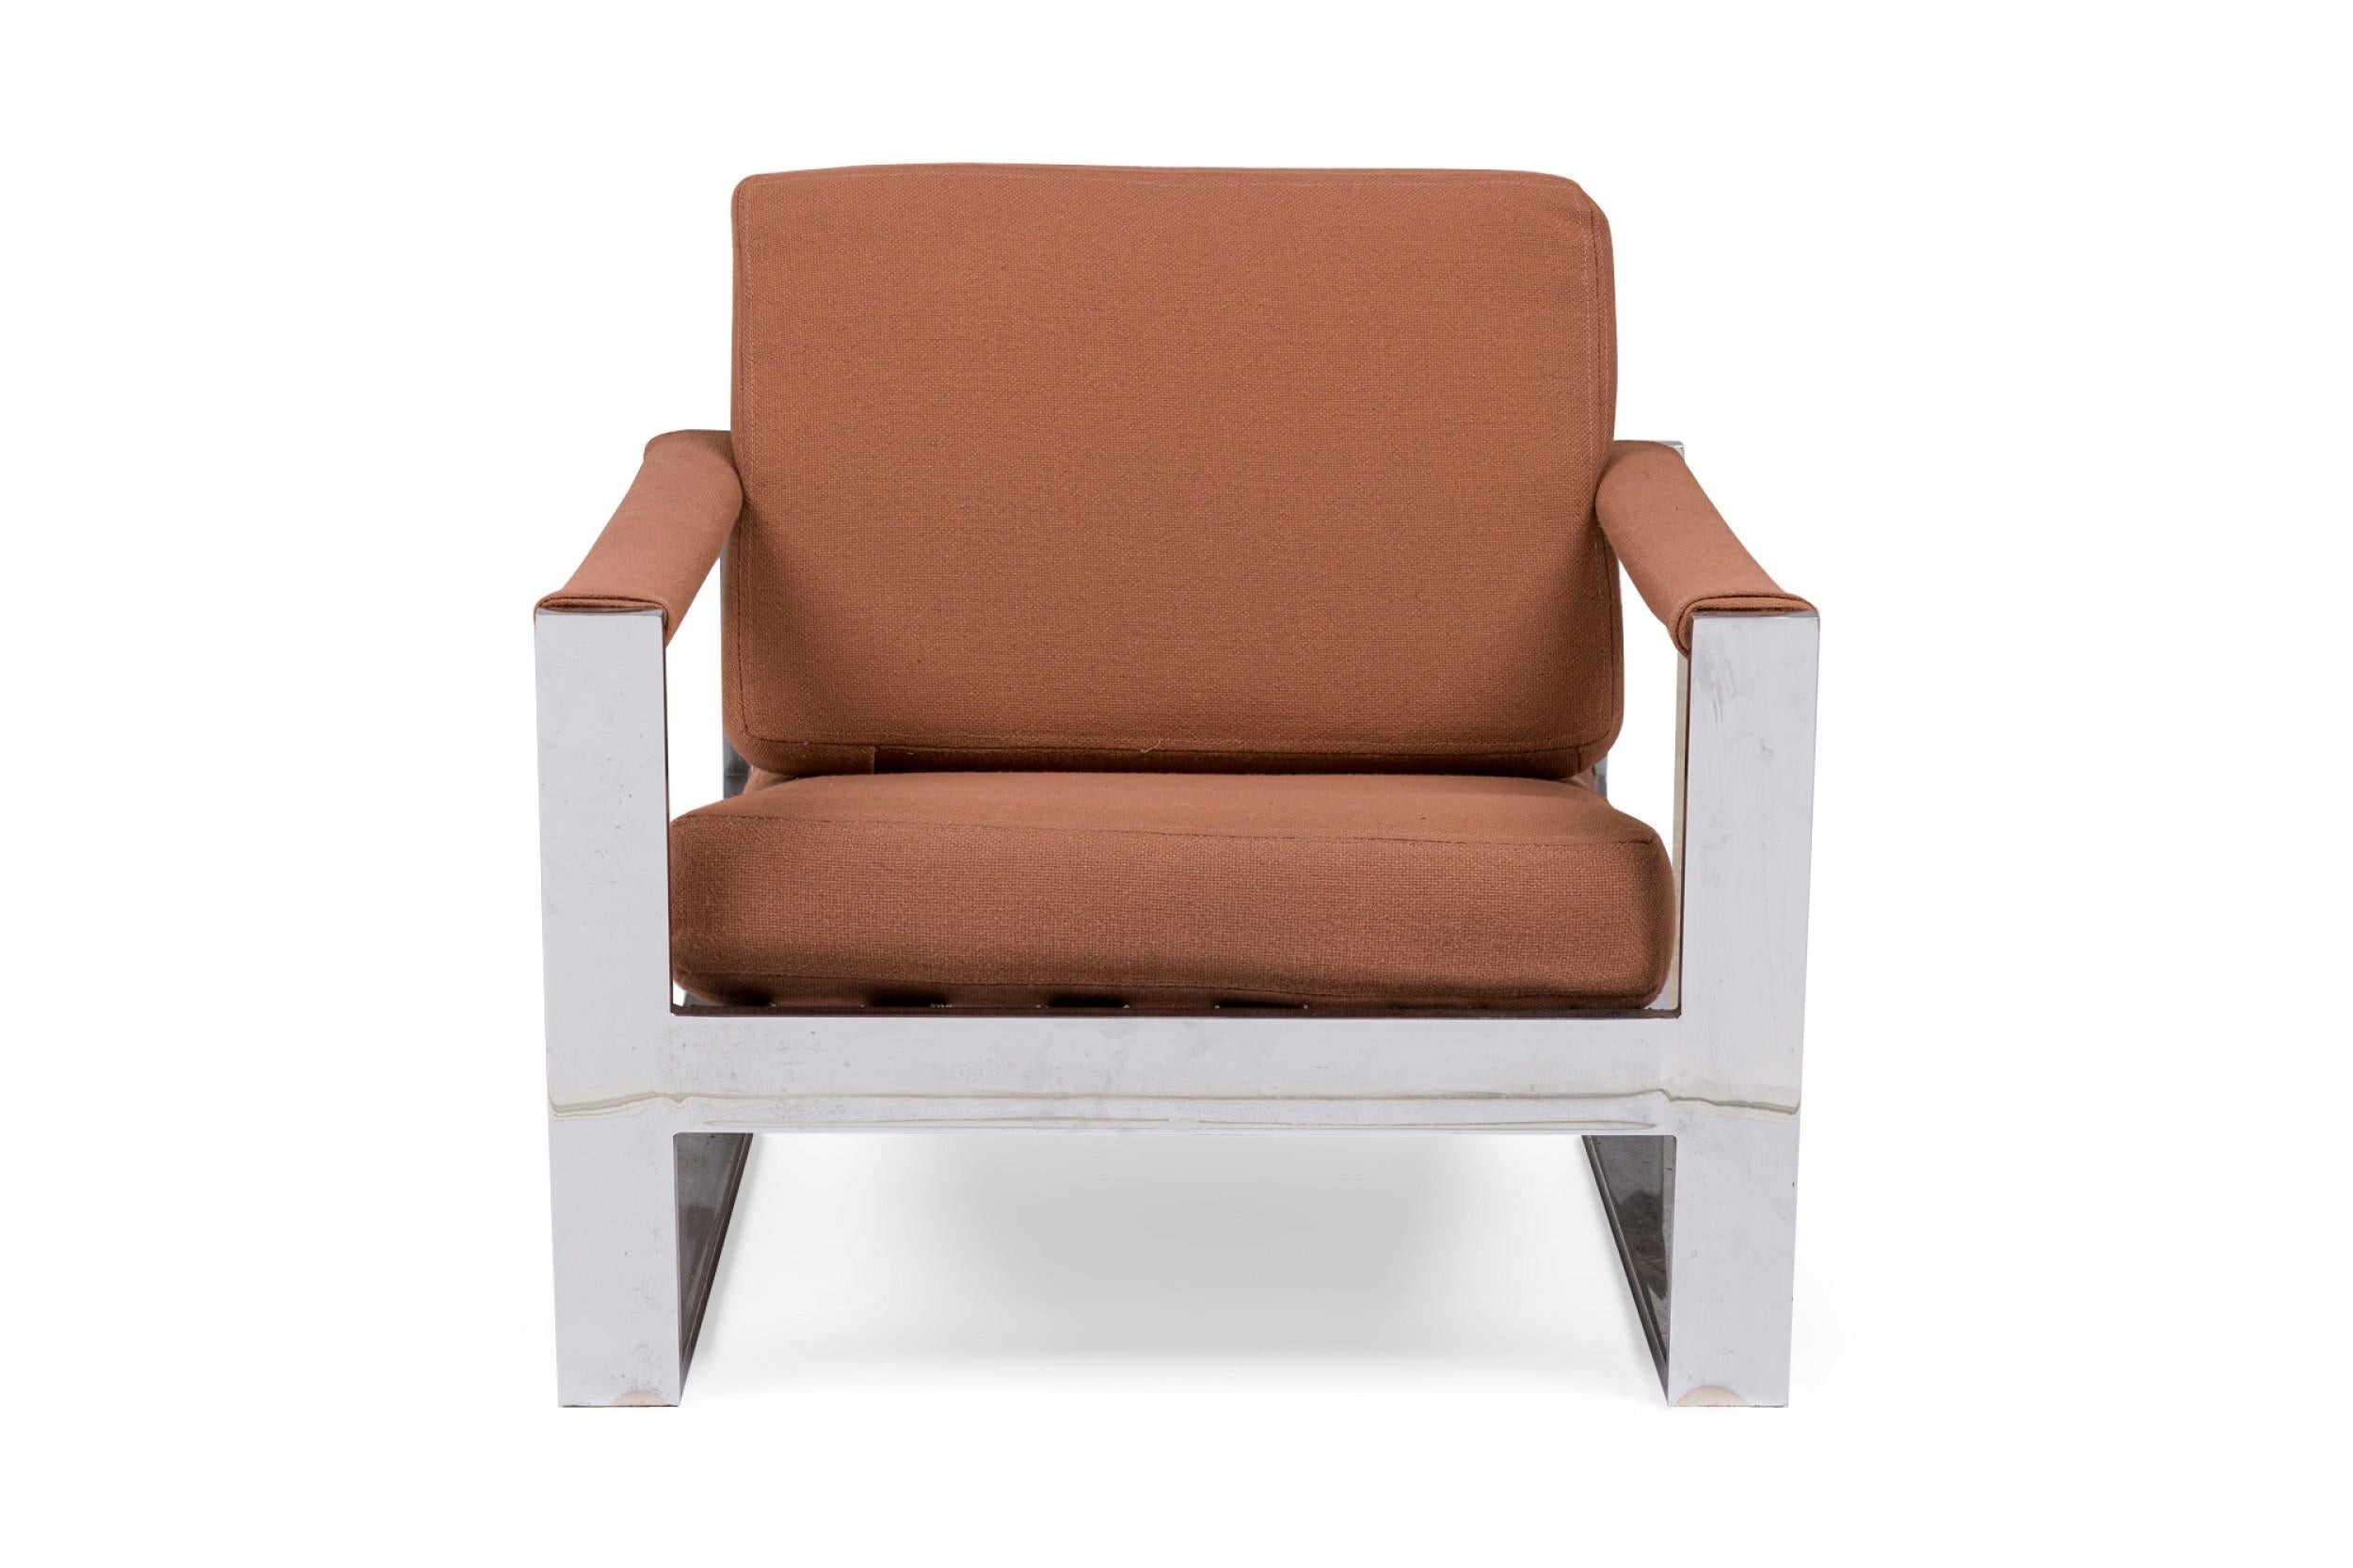 American Mid-Century 'Tank' form lounge / armchair with a flat bar polished chrome frame and dark pink upholstered seat, back and arm covers. (MILO BAUGHMAN)(Similar pieces: DUF0540, DUF0541)